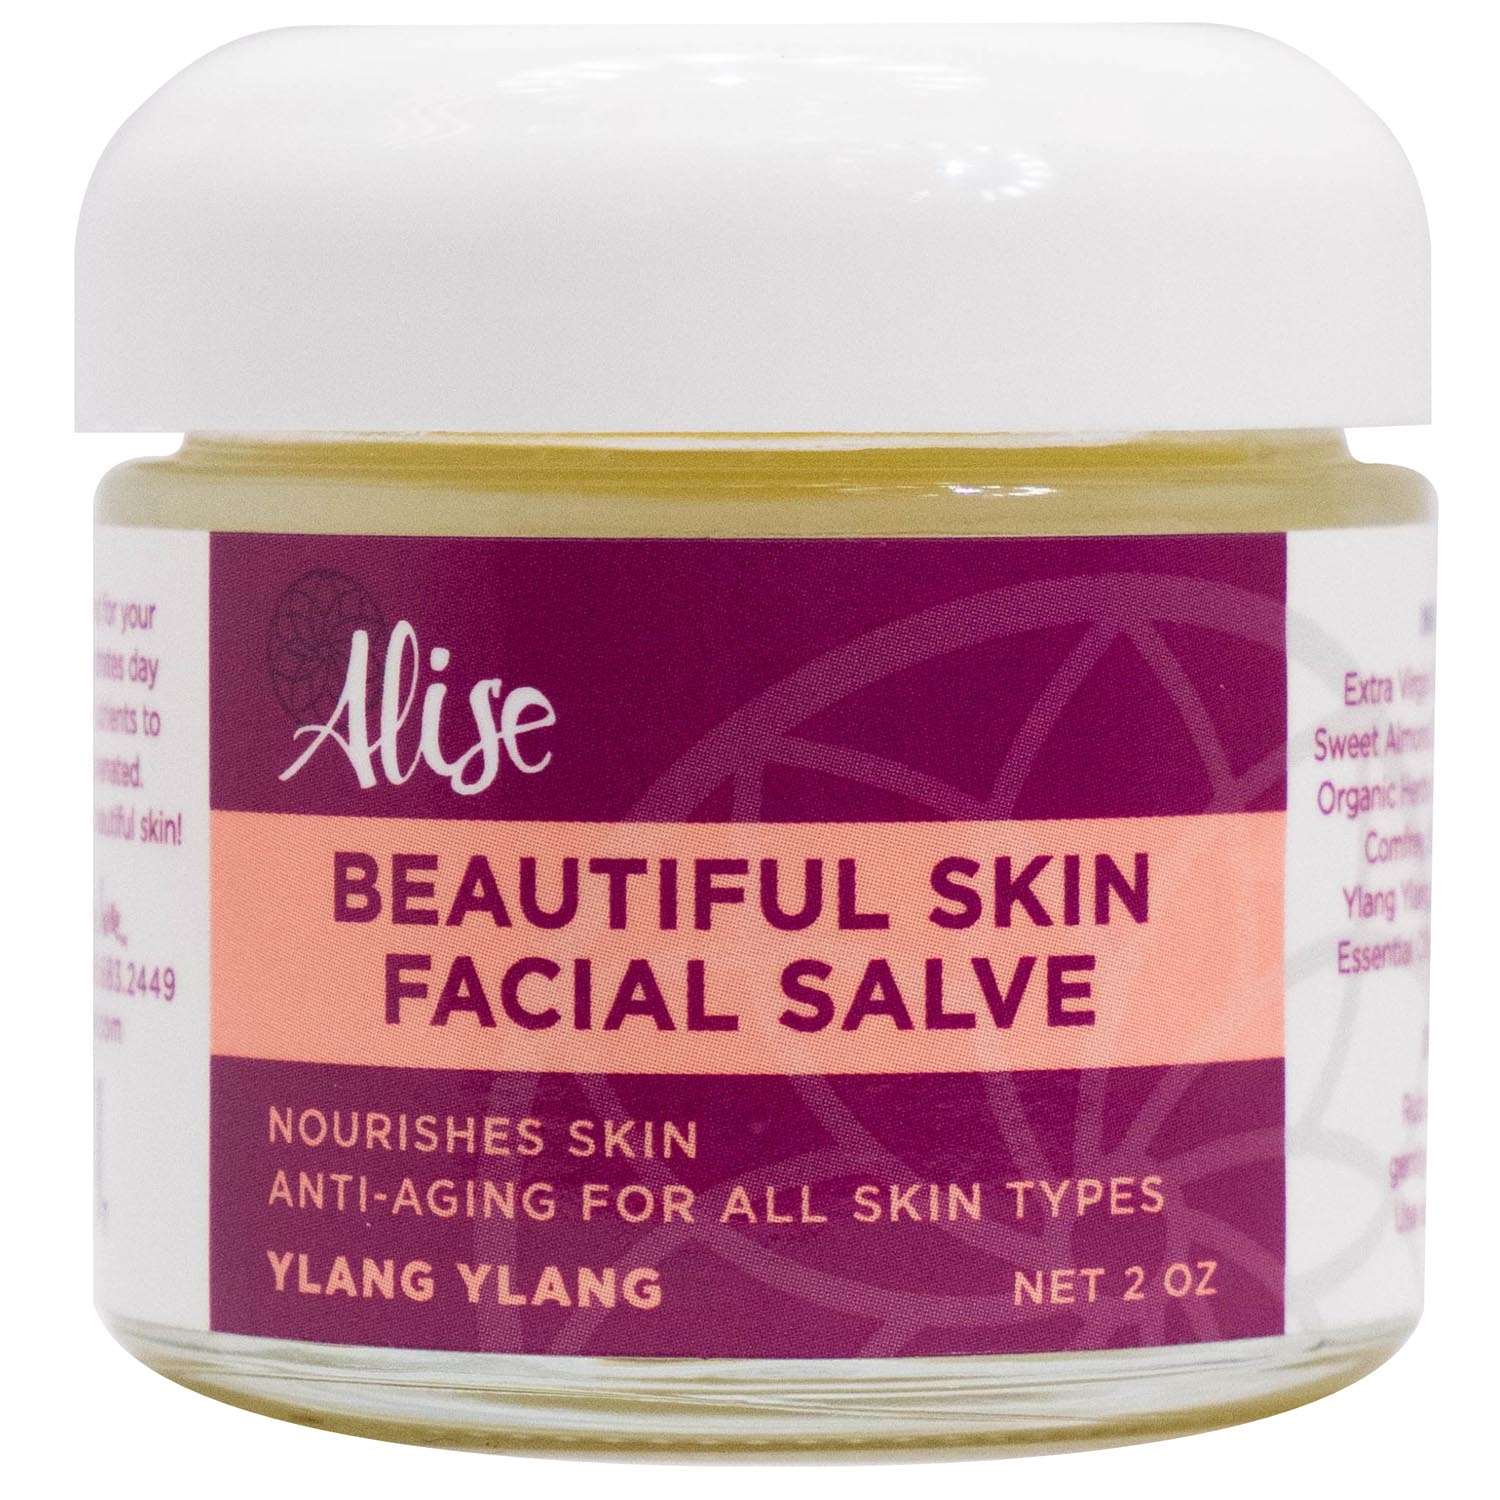 Beautiful Skin Facial Salve Ylang Ylang 2oz handcrafted by Alise Body Care